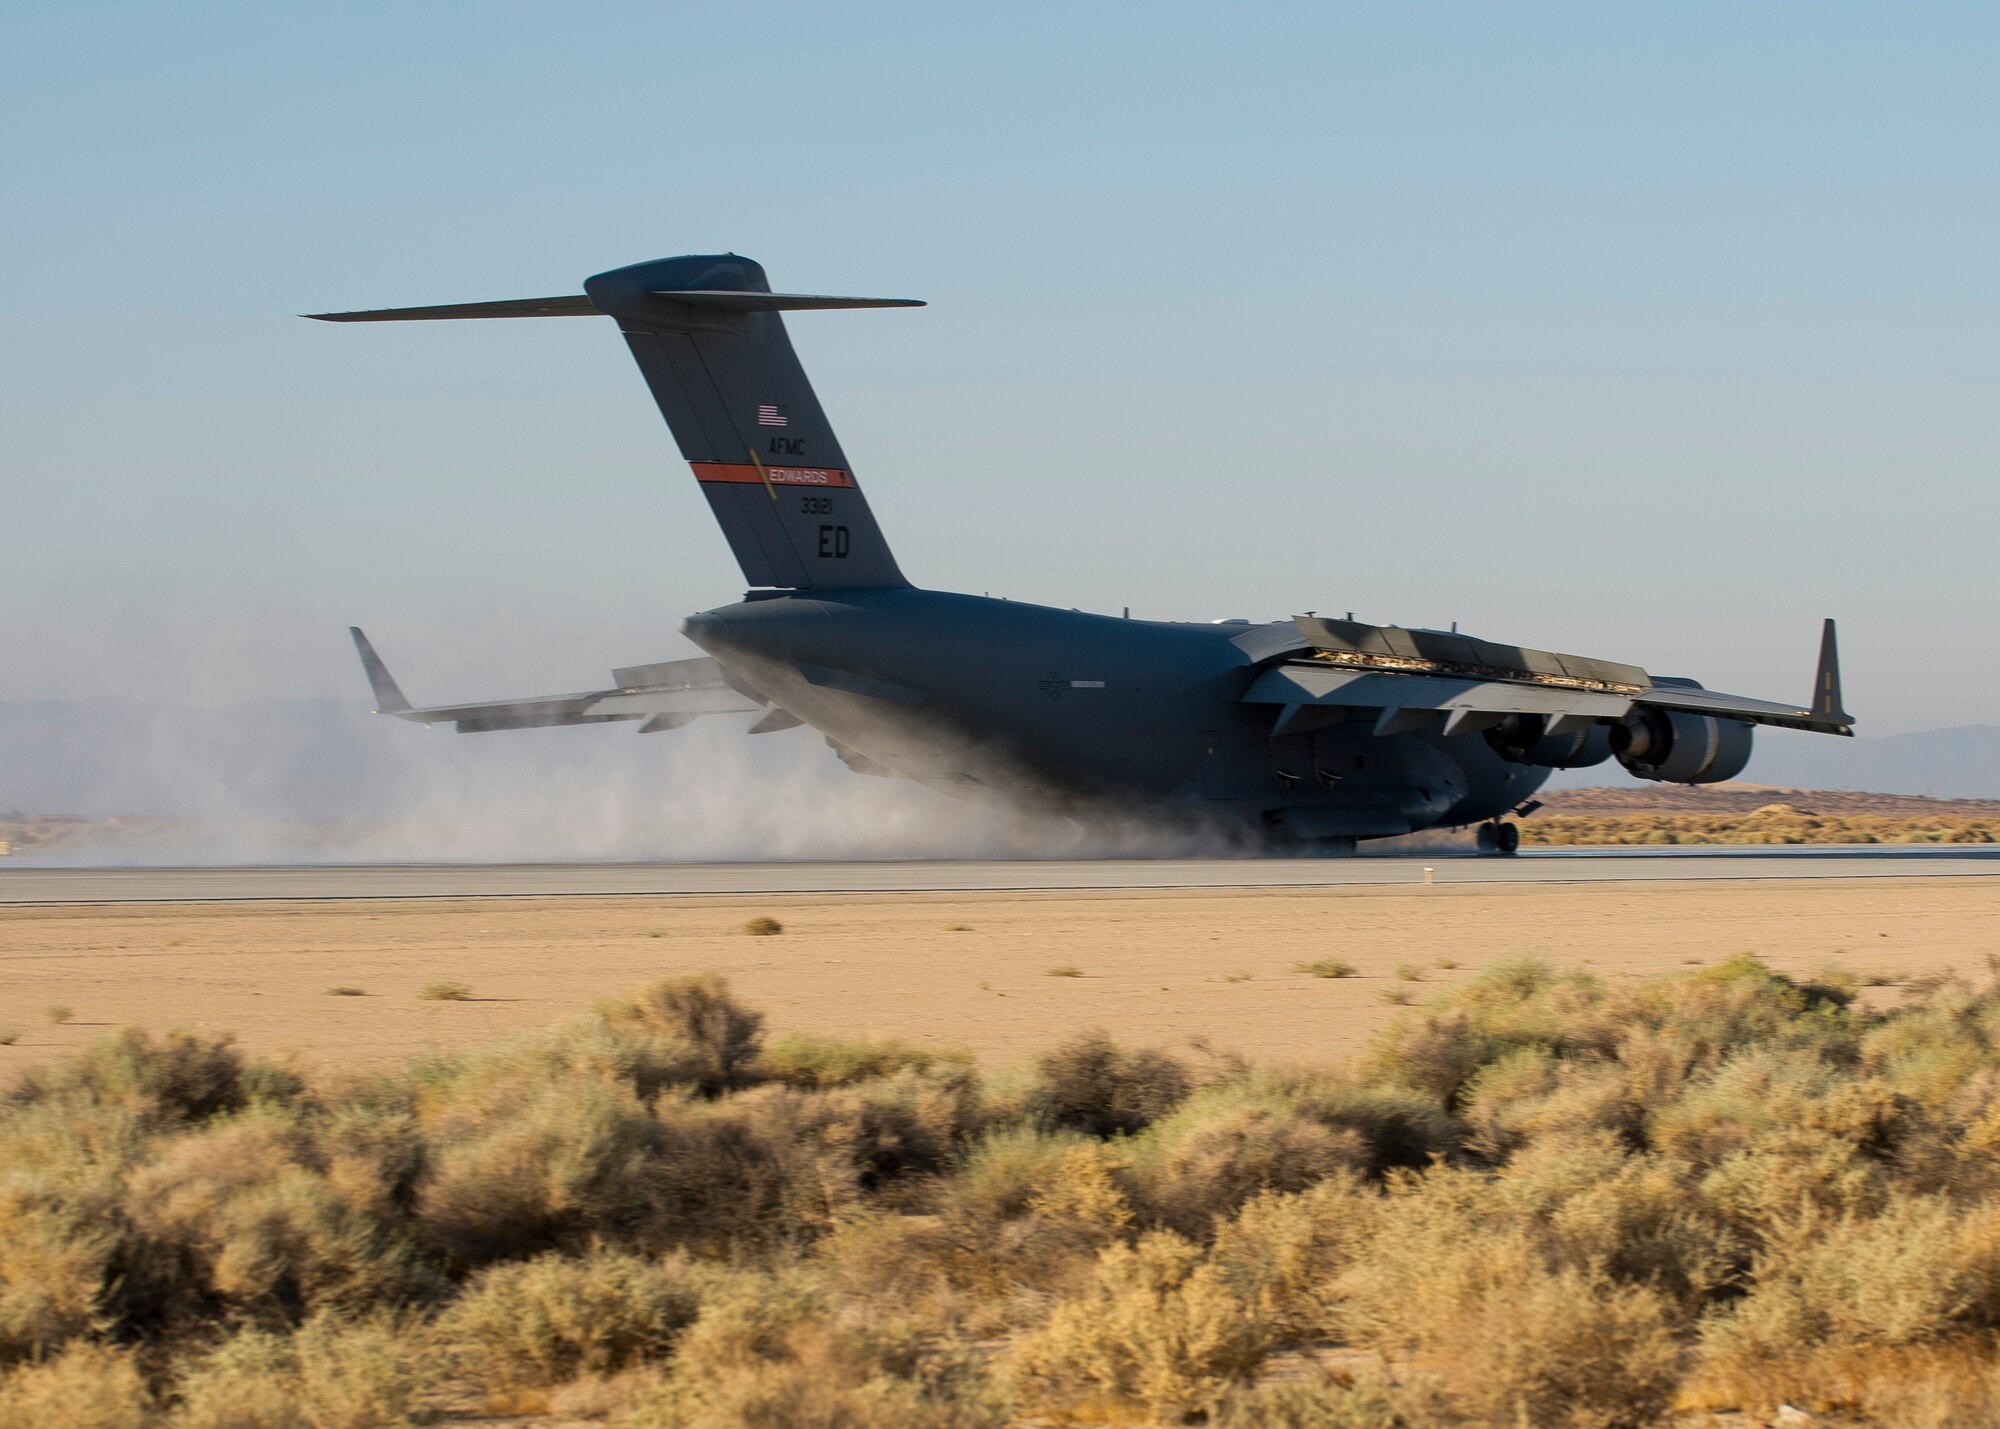 A C-17 Globemaster III performs a wet-runway performance test Aug. 20, 2014, on the flightline at Edwards Air Force Base, Calif. Since Dunlop Tire was selected as the replacement tire for the Globemaster III, the C-17 Global Reach Integrated Test Team at Edwards AFB has been putting the C-17’s new Dunlop tires through wet-and-dry runway takeoff and landing performance tests. (U.S. Air Force photo/ Ethan Wagner)